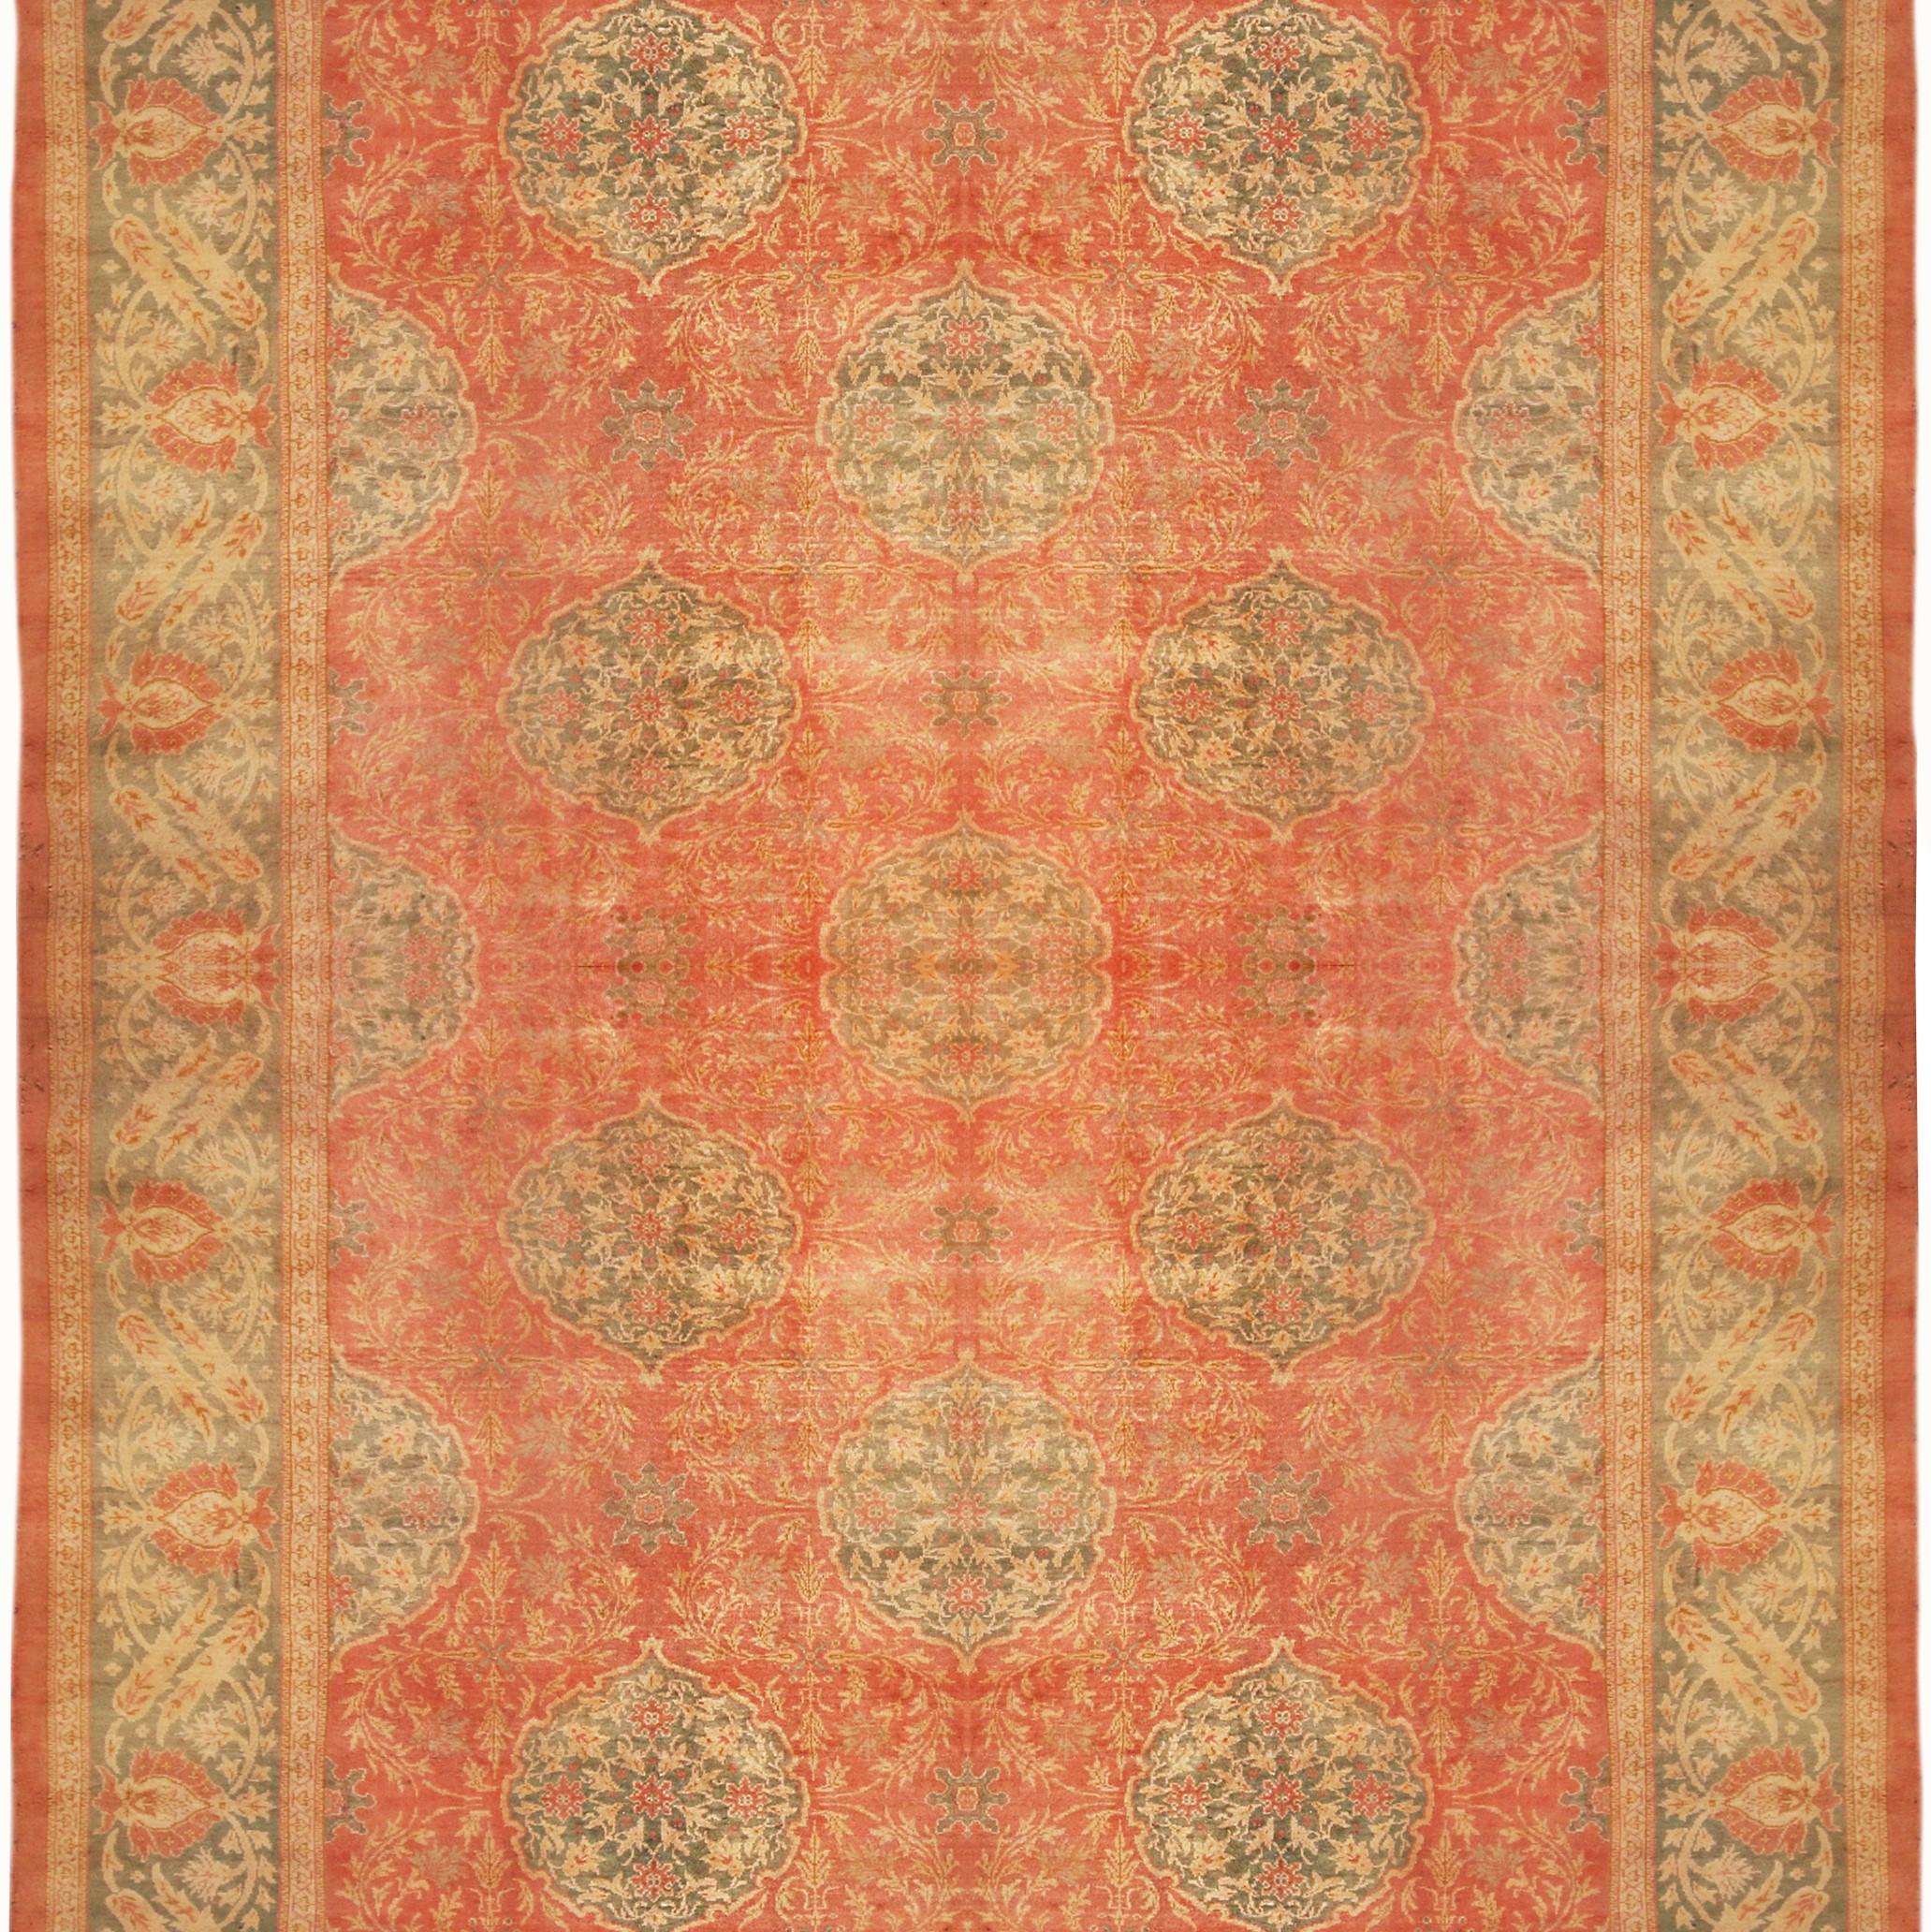 Hand knotted in wool originating from Turkey circa 1890-1900, this antique rug connotes a unique transitional Oushak rug design of particular rarity in its large size 12 x 17 dimensions and colorway alike-rich hues of red and green as the foreground